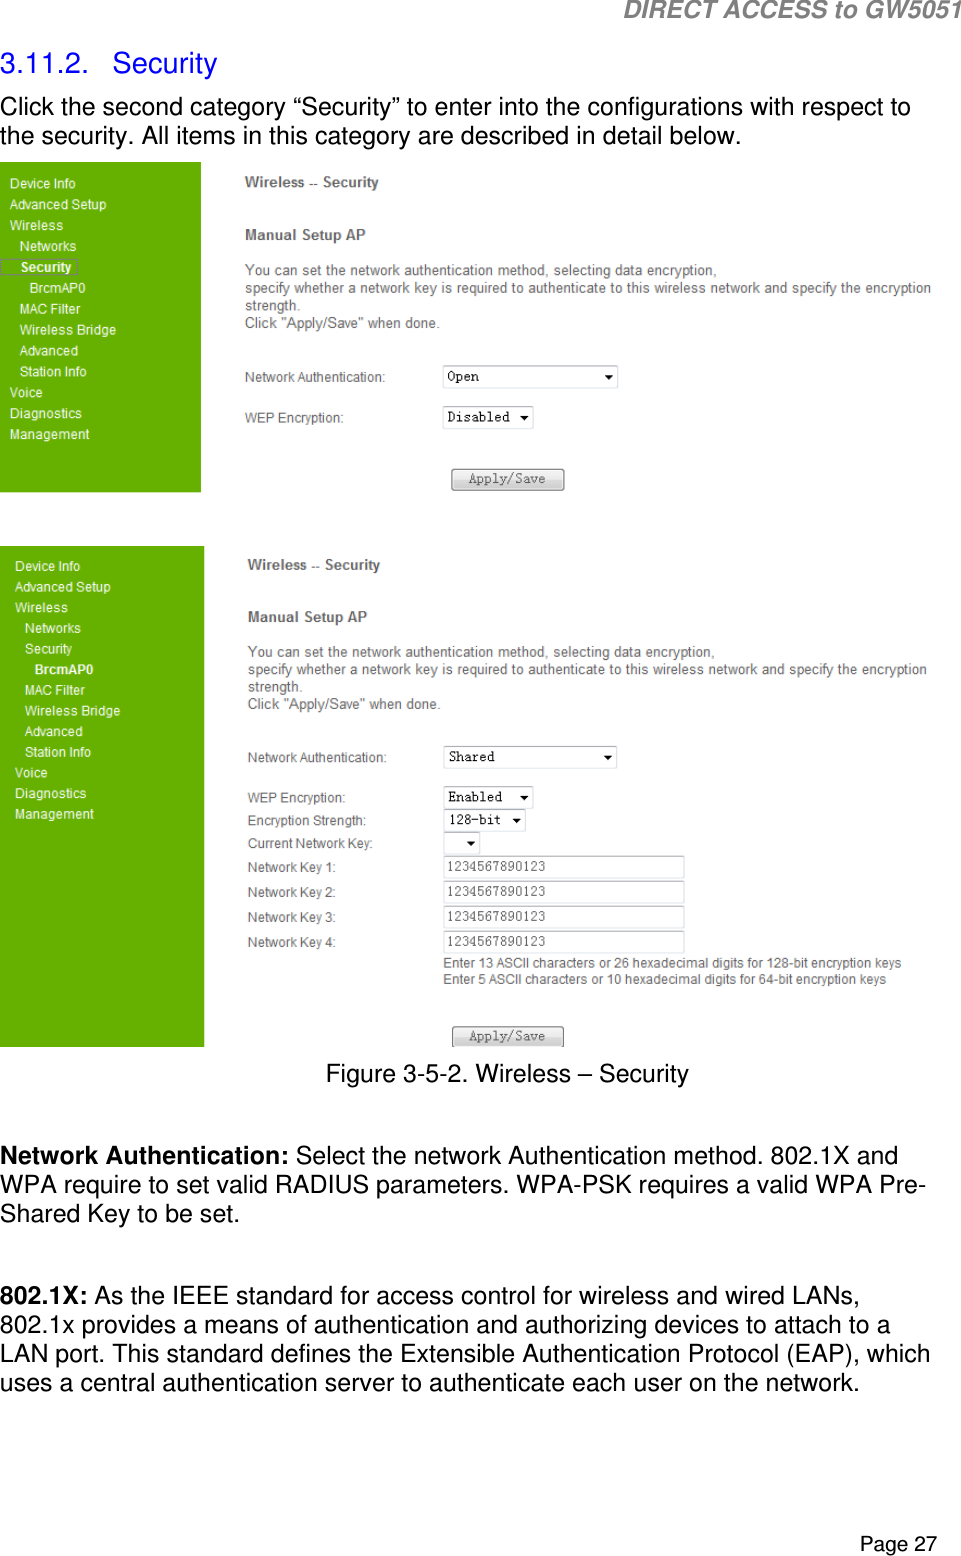                                                                                                                                                                                                                           DIRECT ACCESS to GW5051    Page 27 3.11.2.  Security Click the second category “Security” to enter into the configurations with respect to the security. All items in this category are described in detail below.    Figure 3-5-2. Wireless – Security  Network Authentication: Select the network Authentication method. 802.1X and WPA require to set valid RADIUS parameters. WPA-PSK requires a valid WPA Pre-Shared Key to be set.  802.1X: As the IEEE standard for access control for wireless and wired LANs, 802.1x provides a means of authentication and authorizing devices to attach to a LAN port. This standard defines the Extensible Authentication Protocol (EAP), which uses a central authentication server to authenticate each user on the network.  